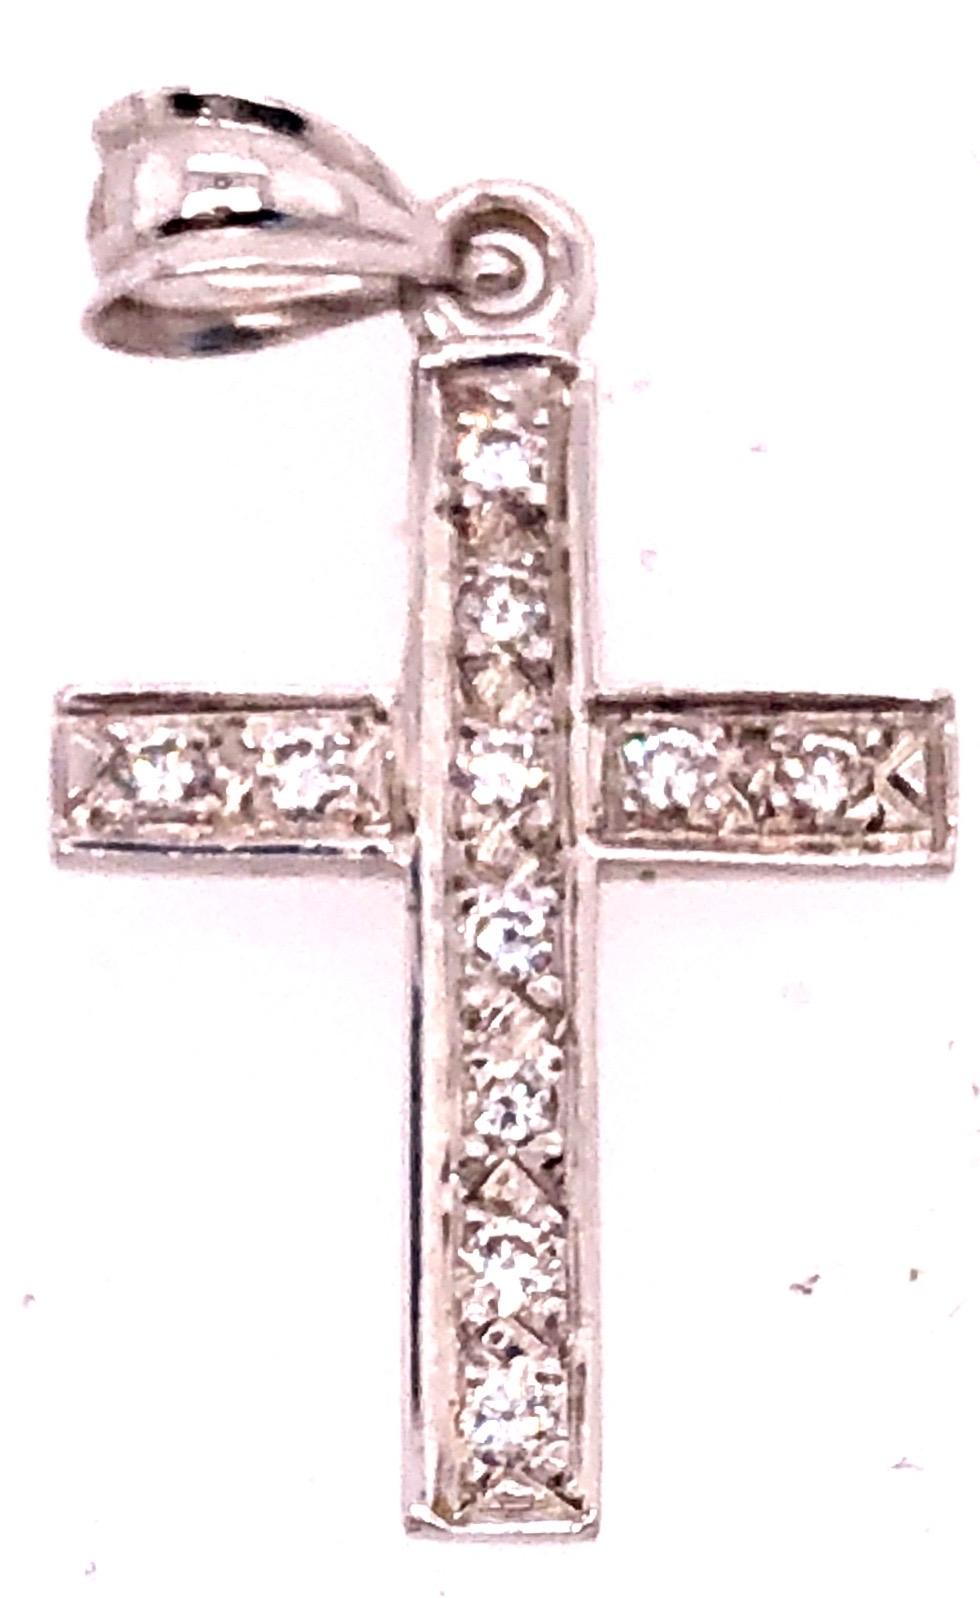 14 Karat White Gold Religious / Crucifix Pendant with Eleven Round Diamonds.
0.25 Total diamond weight
5.1 grams total weight.
28.99 mm height.